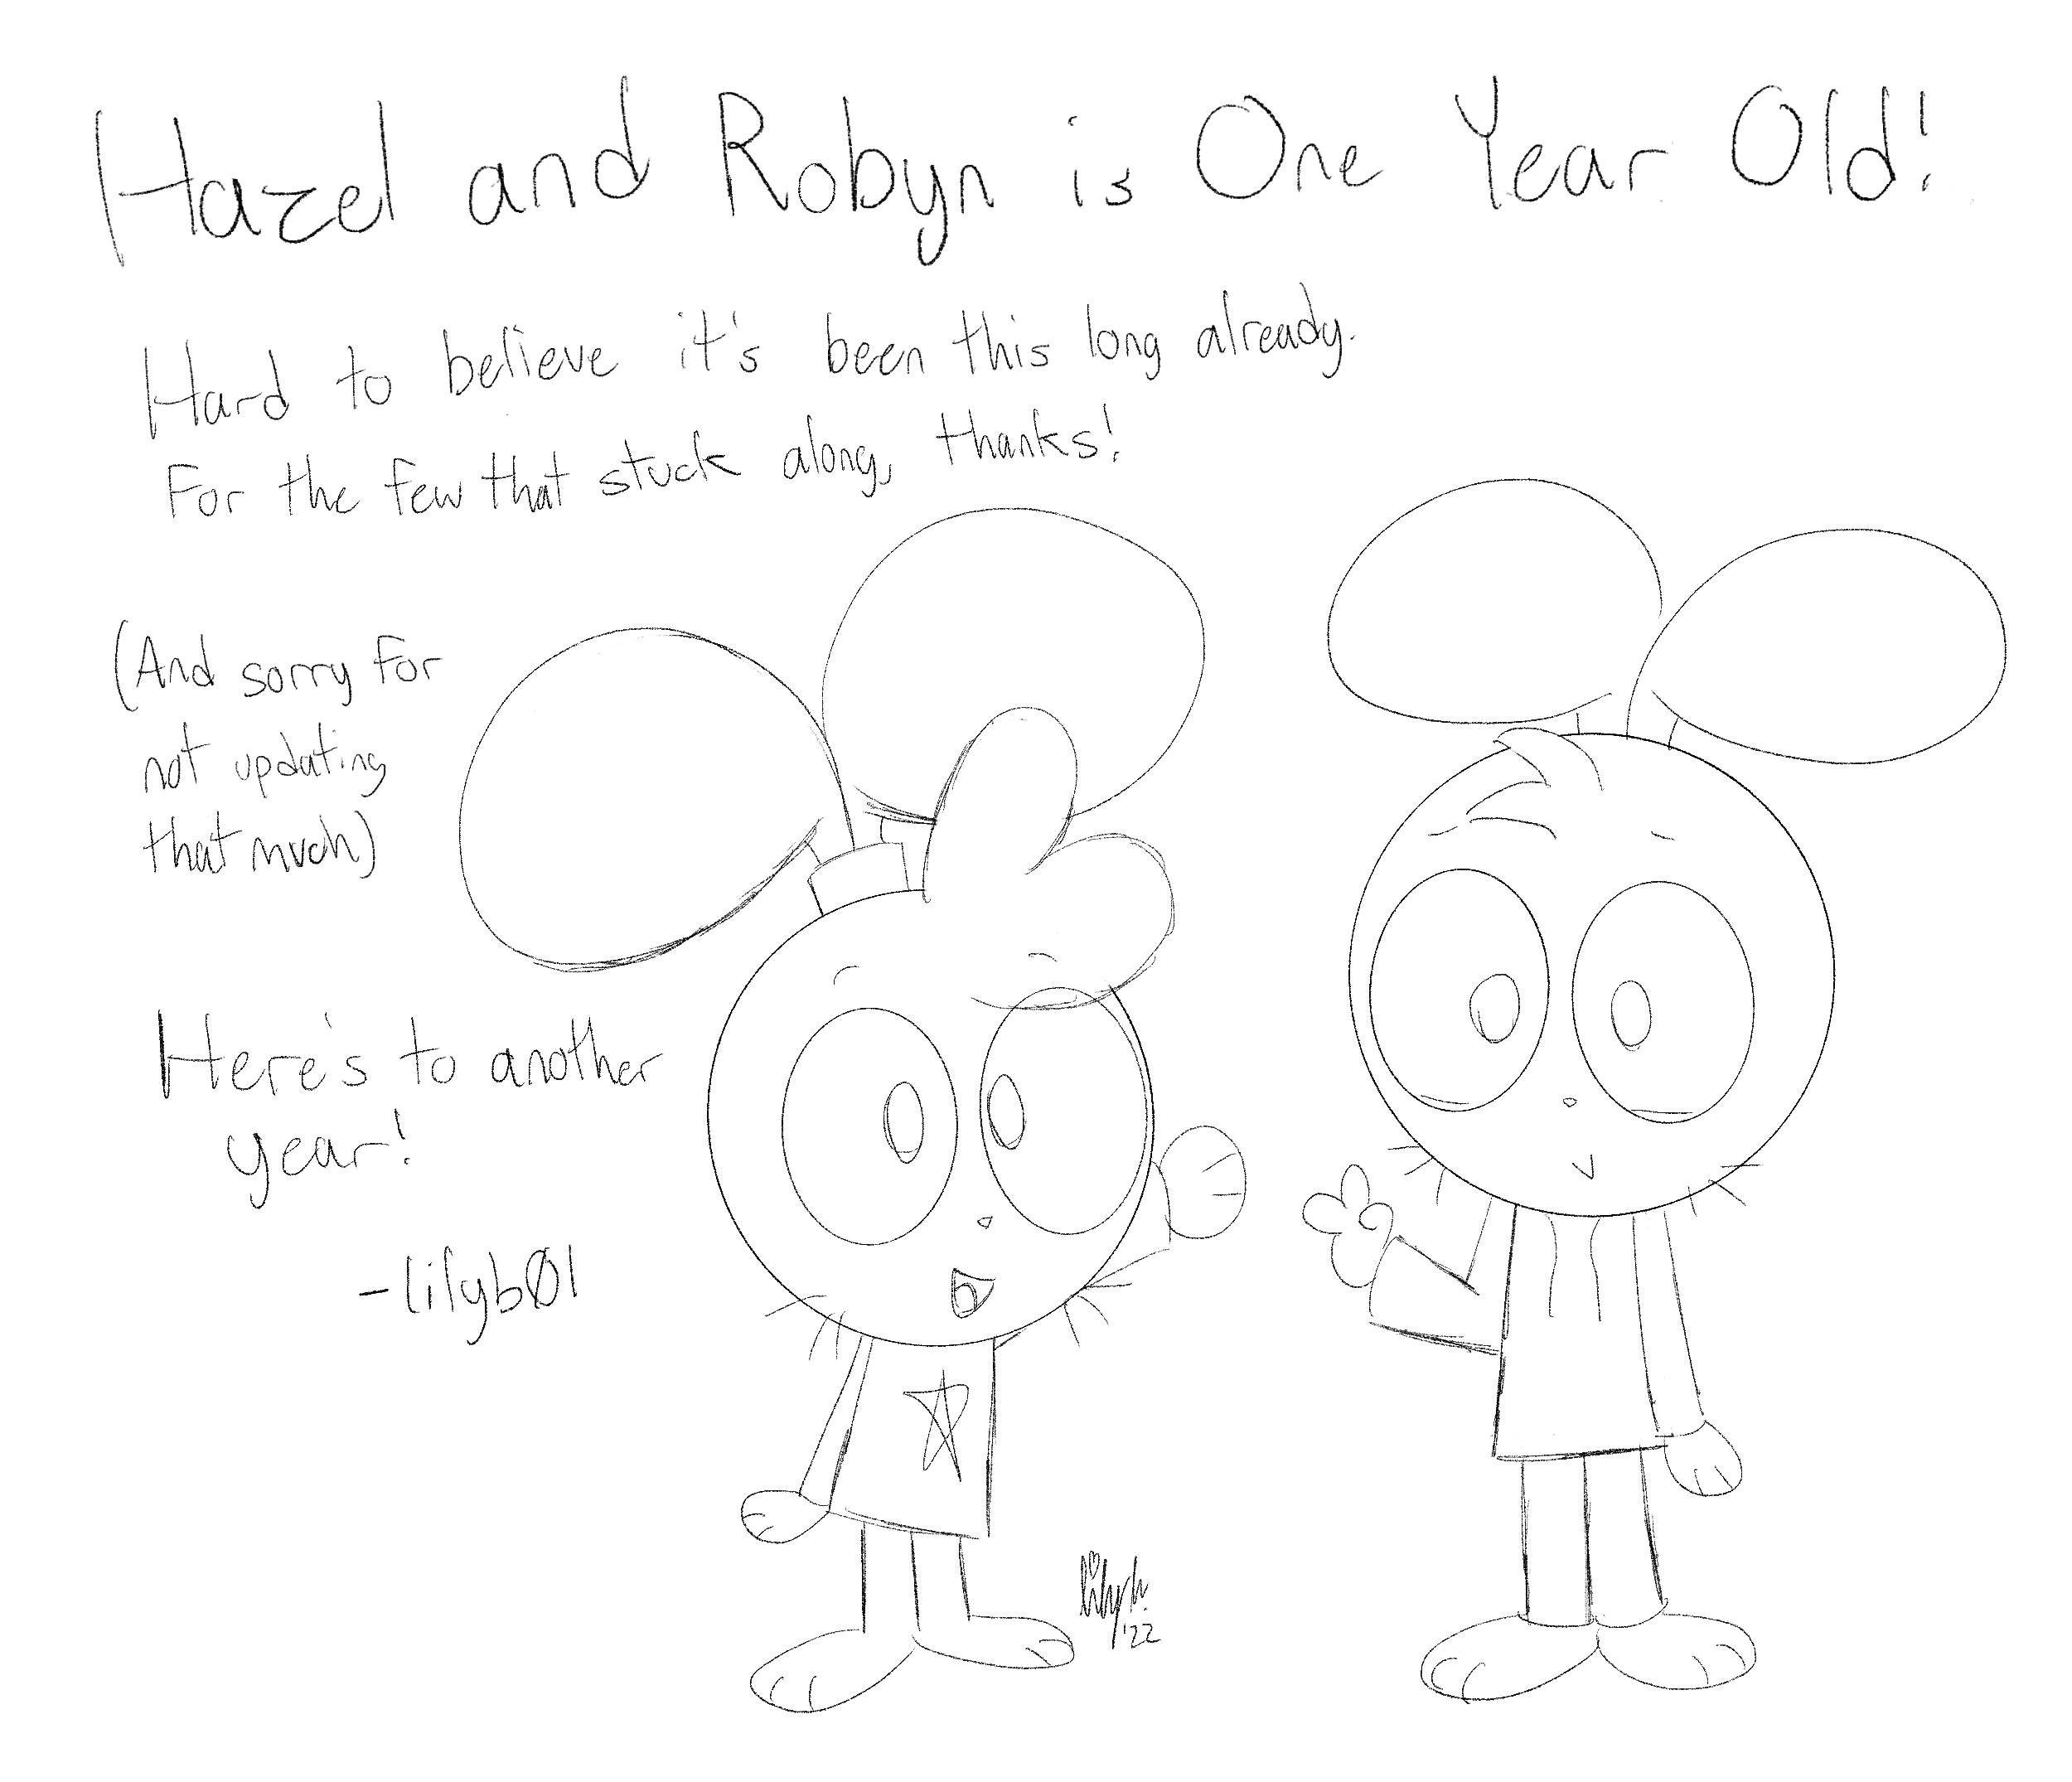 Hazel and Robyn One Year Anniversary! Hard to believe it's been this long already. For the few that stuck along, thanks! (And sorry for not updating that much) Here's to another year! -lilyb01